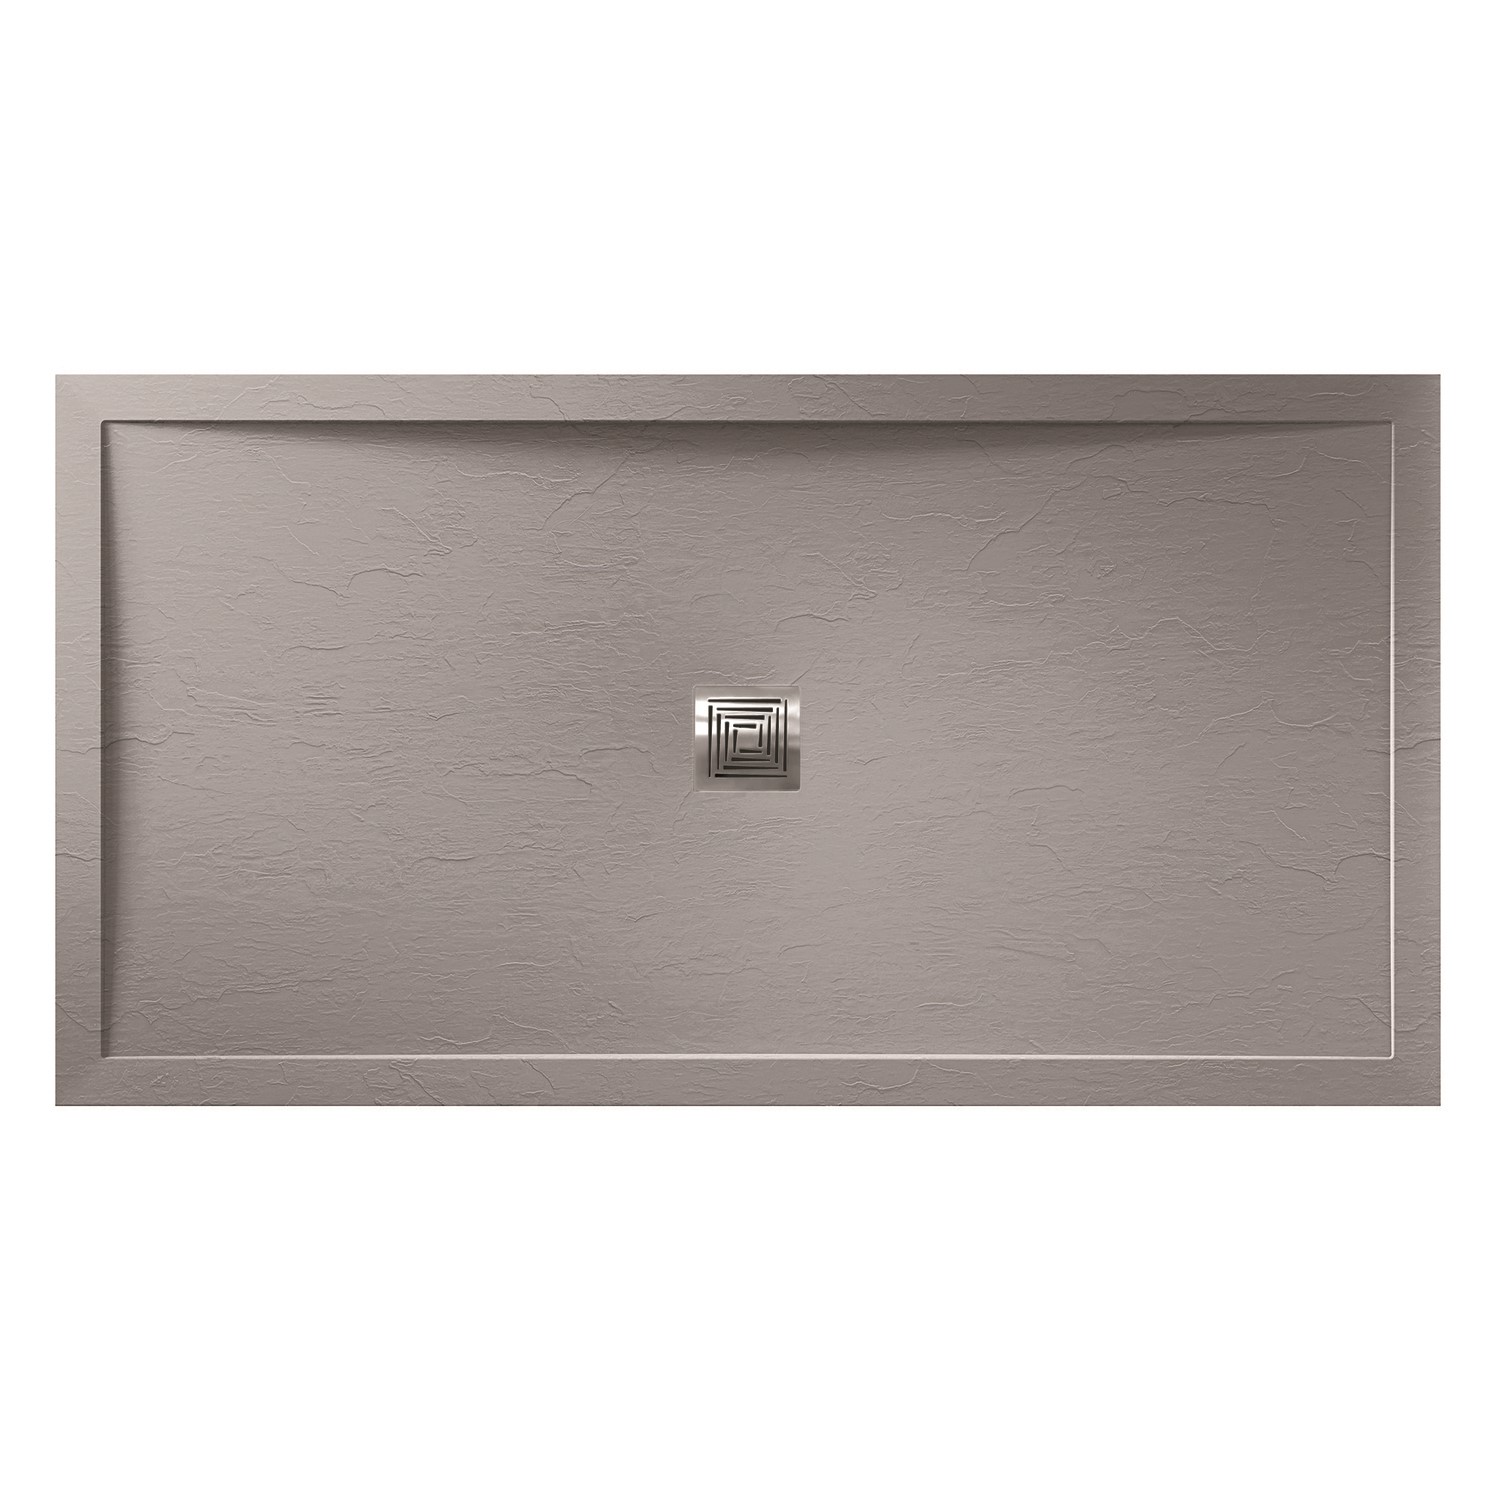 Grey Slate effect Rectangular 1000 x 800mm Shower Tray with Silver Waste - Aqualavo